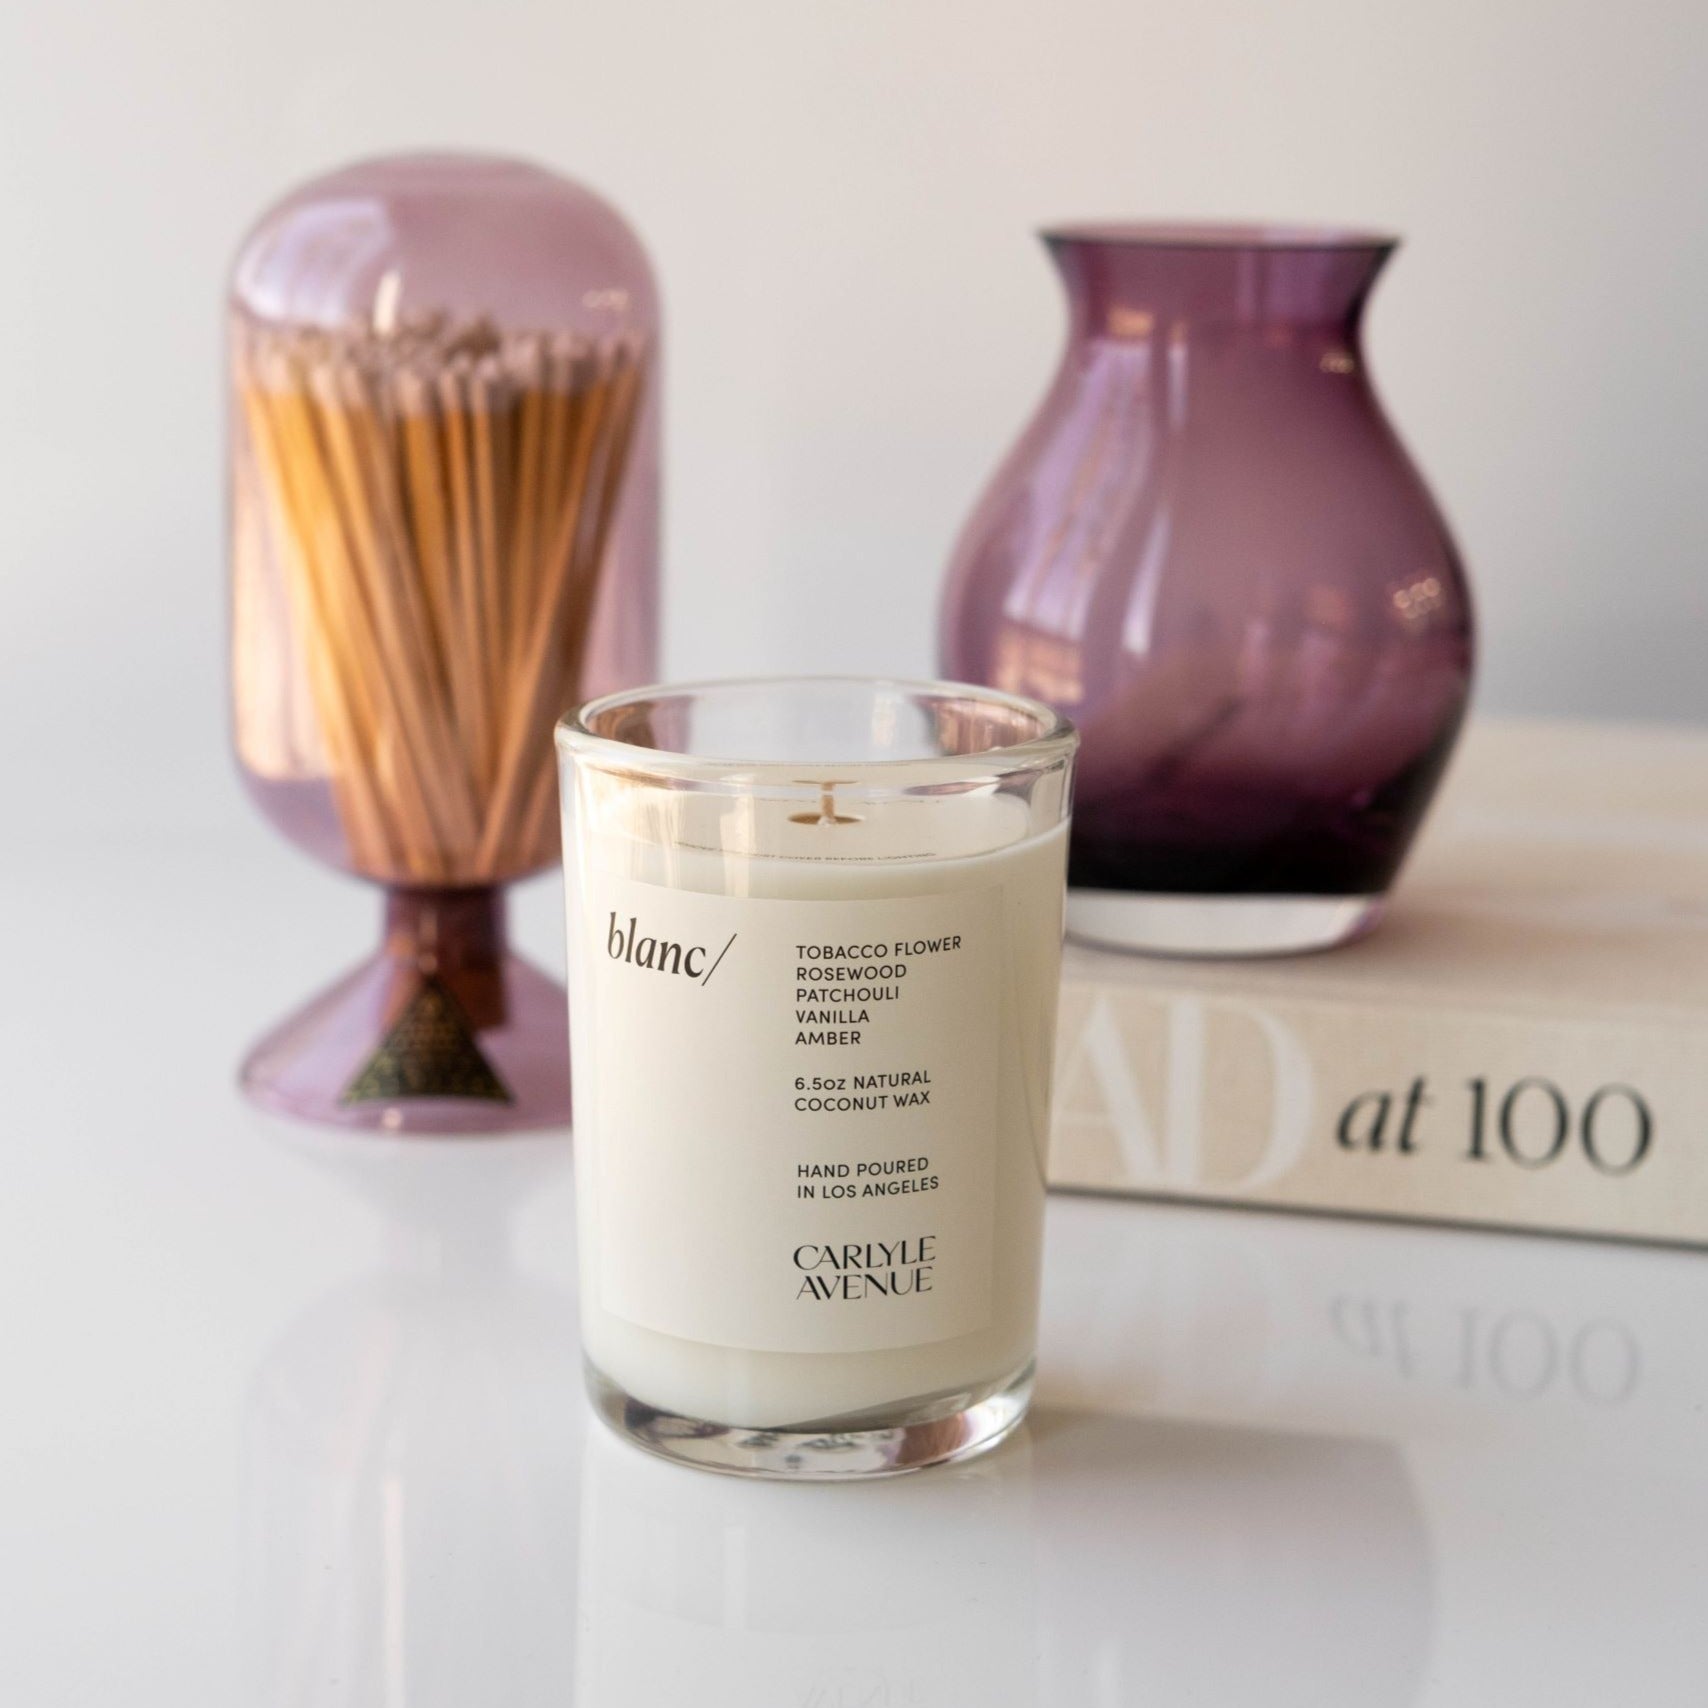 Carlyle Avenue Scented Candle - Blanc